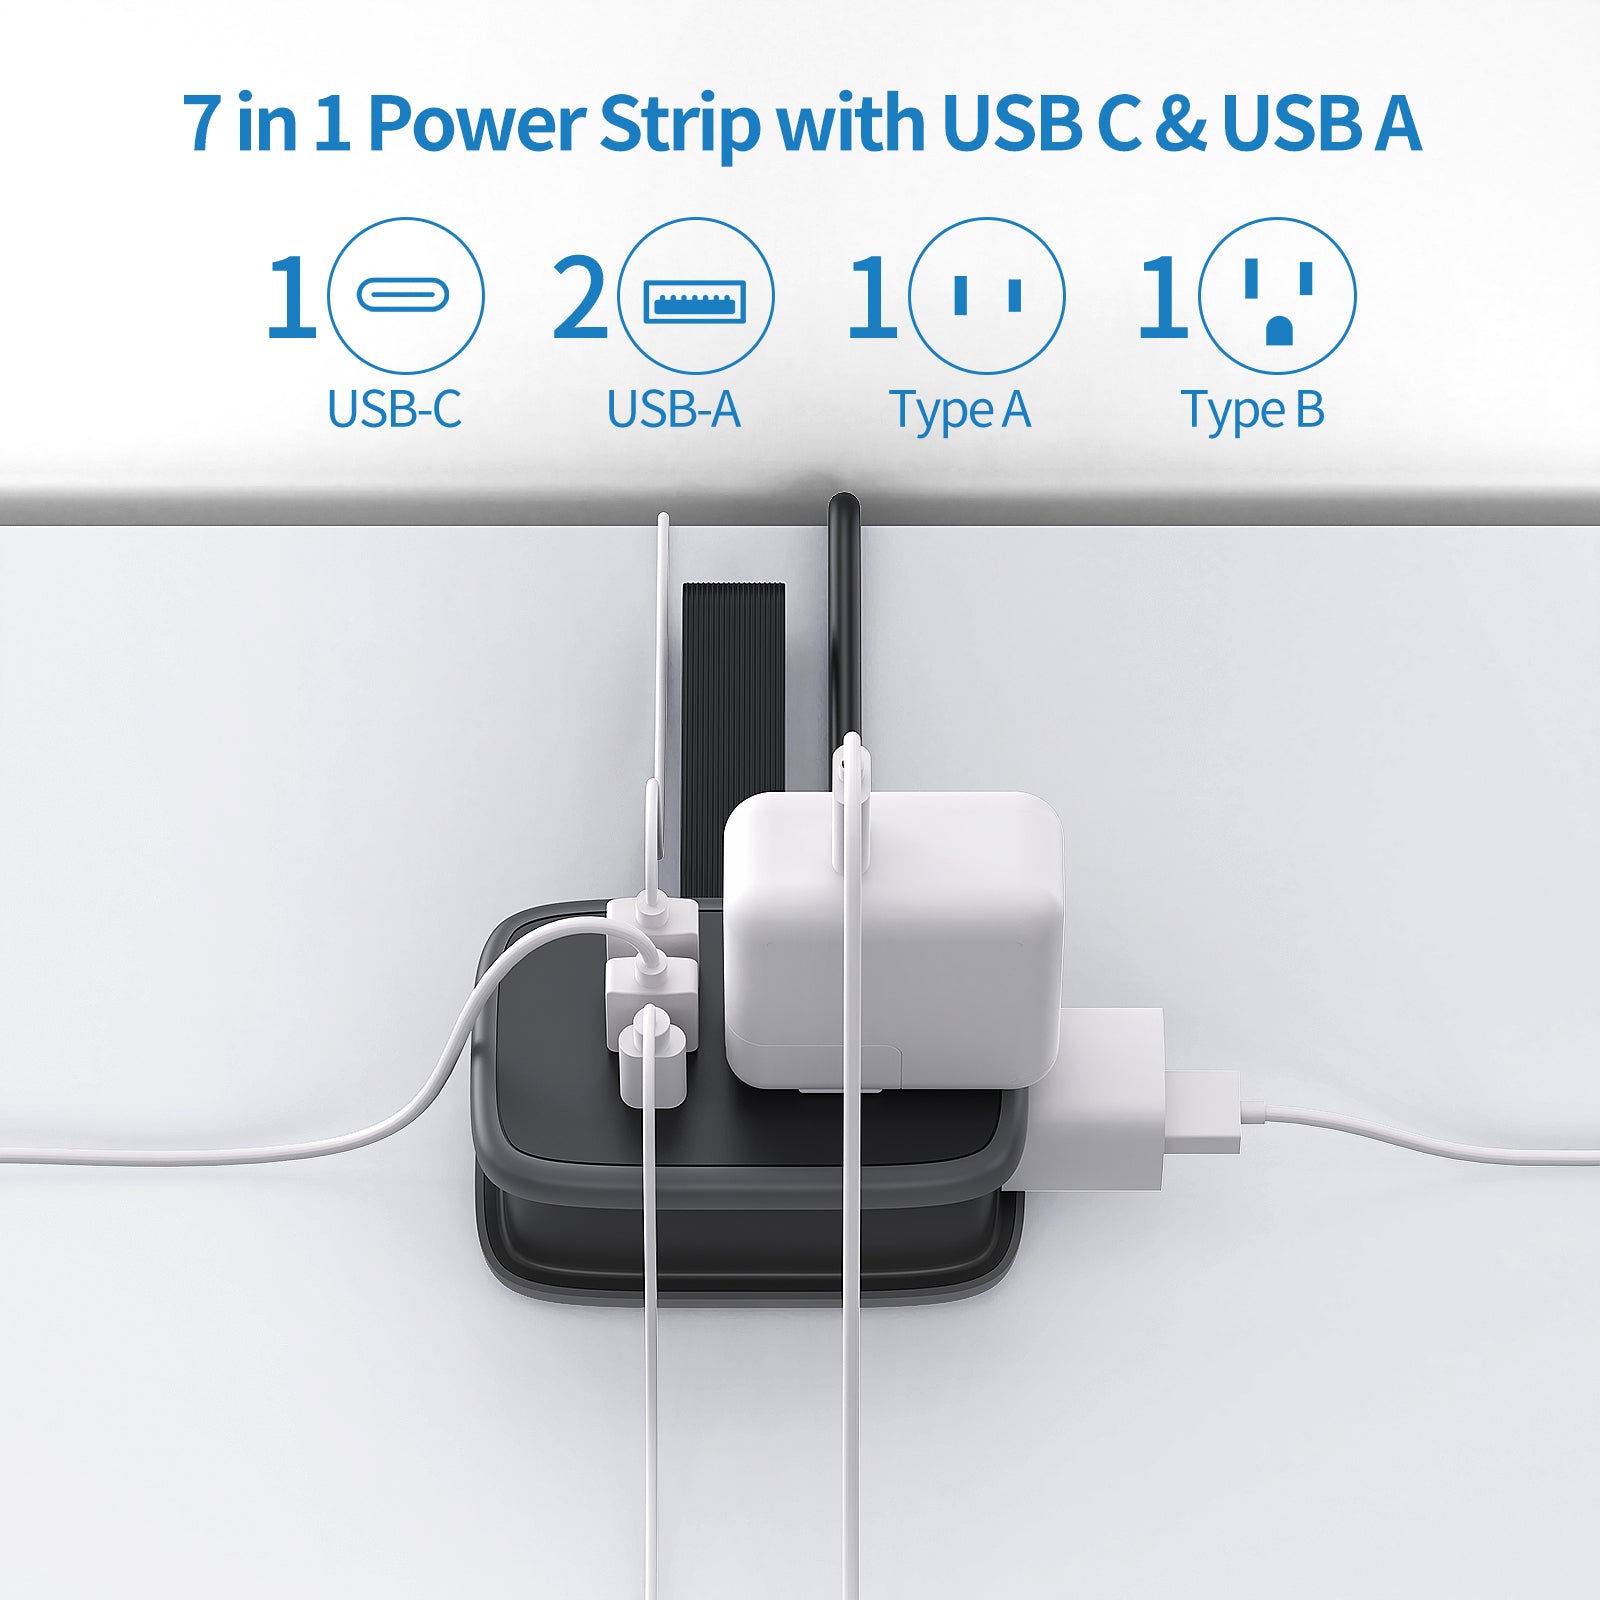 Ntonpower New Pocket Power Strip 2 Outlets 3 USB Ports